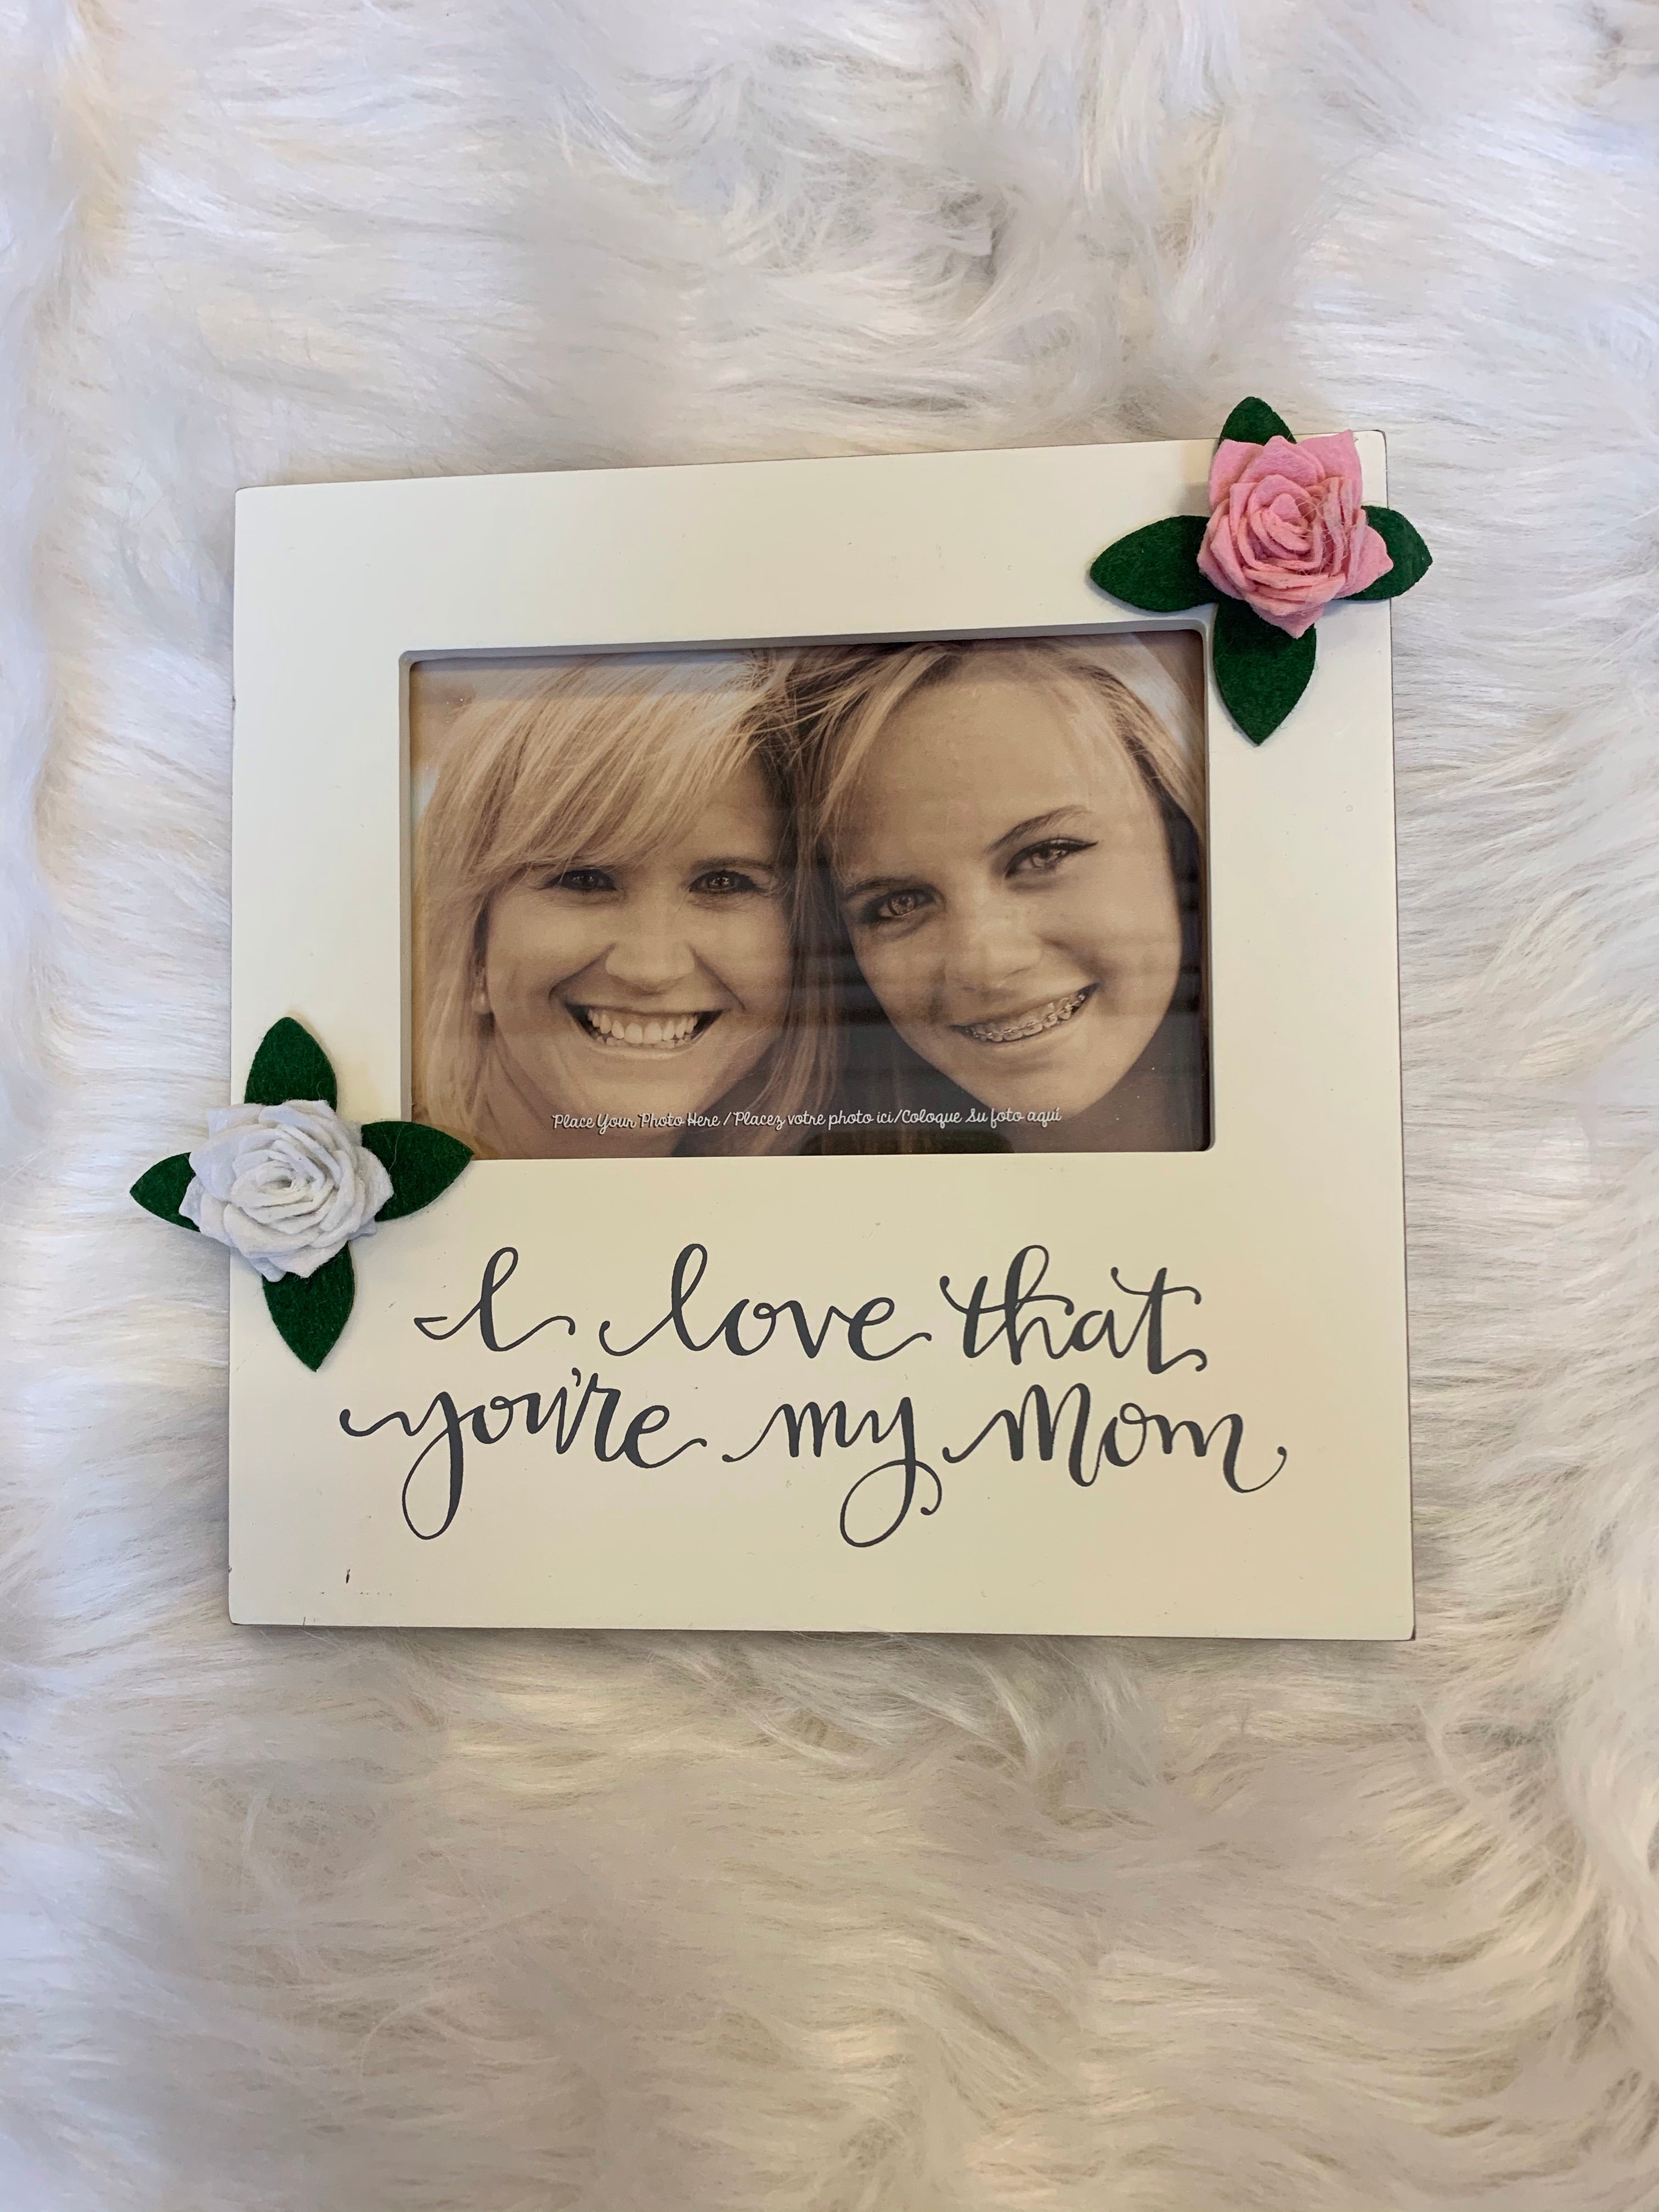 “I love that your my mom.” -Picture Frame